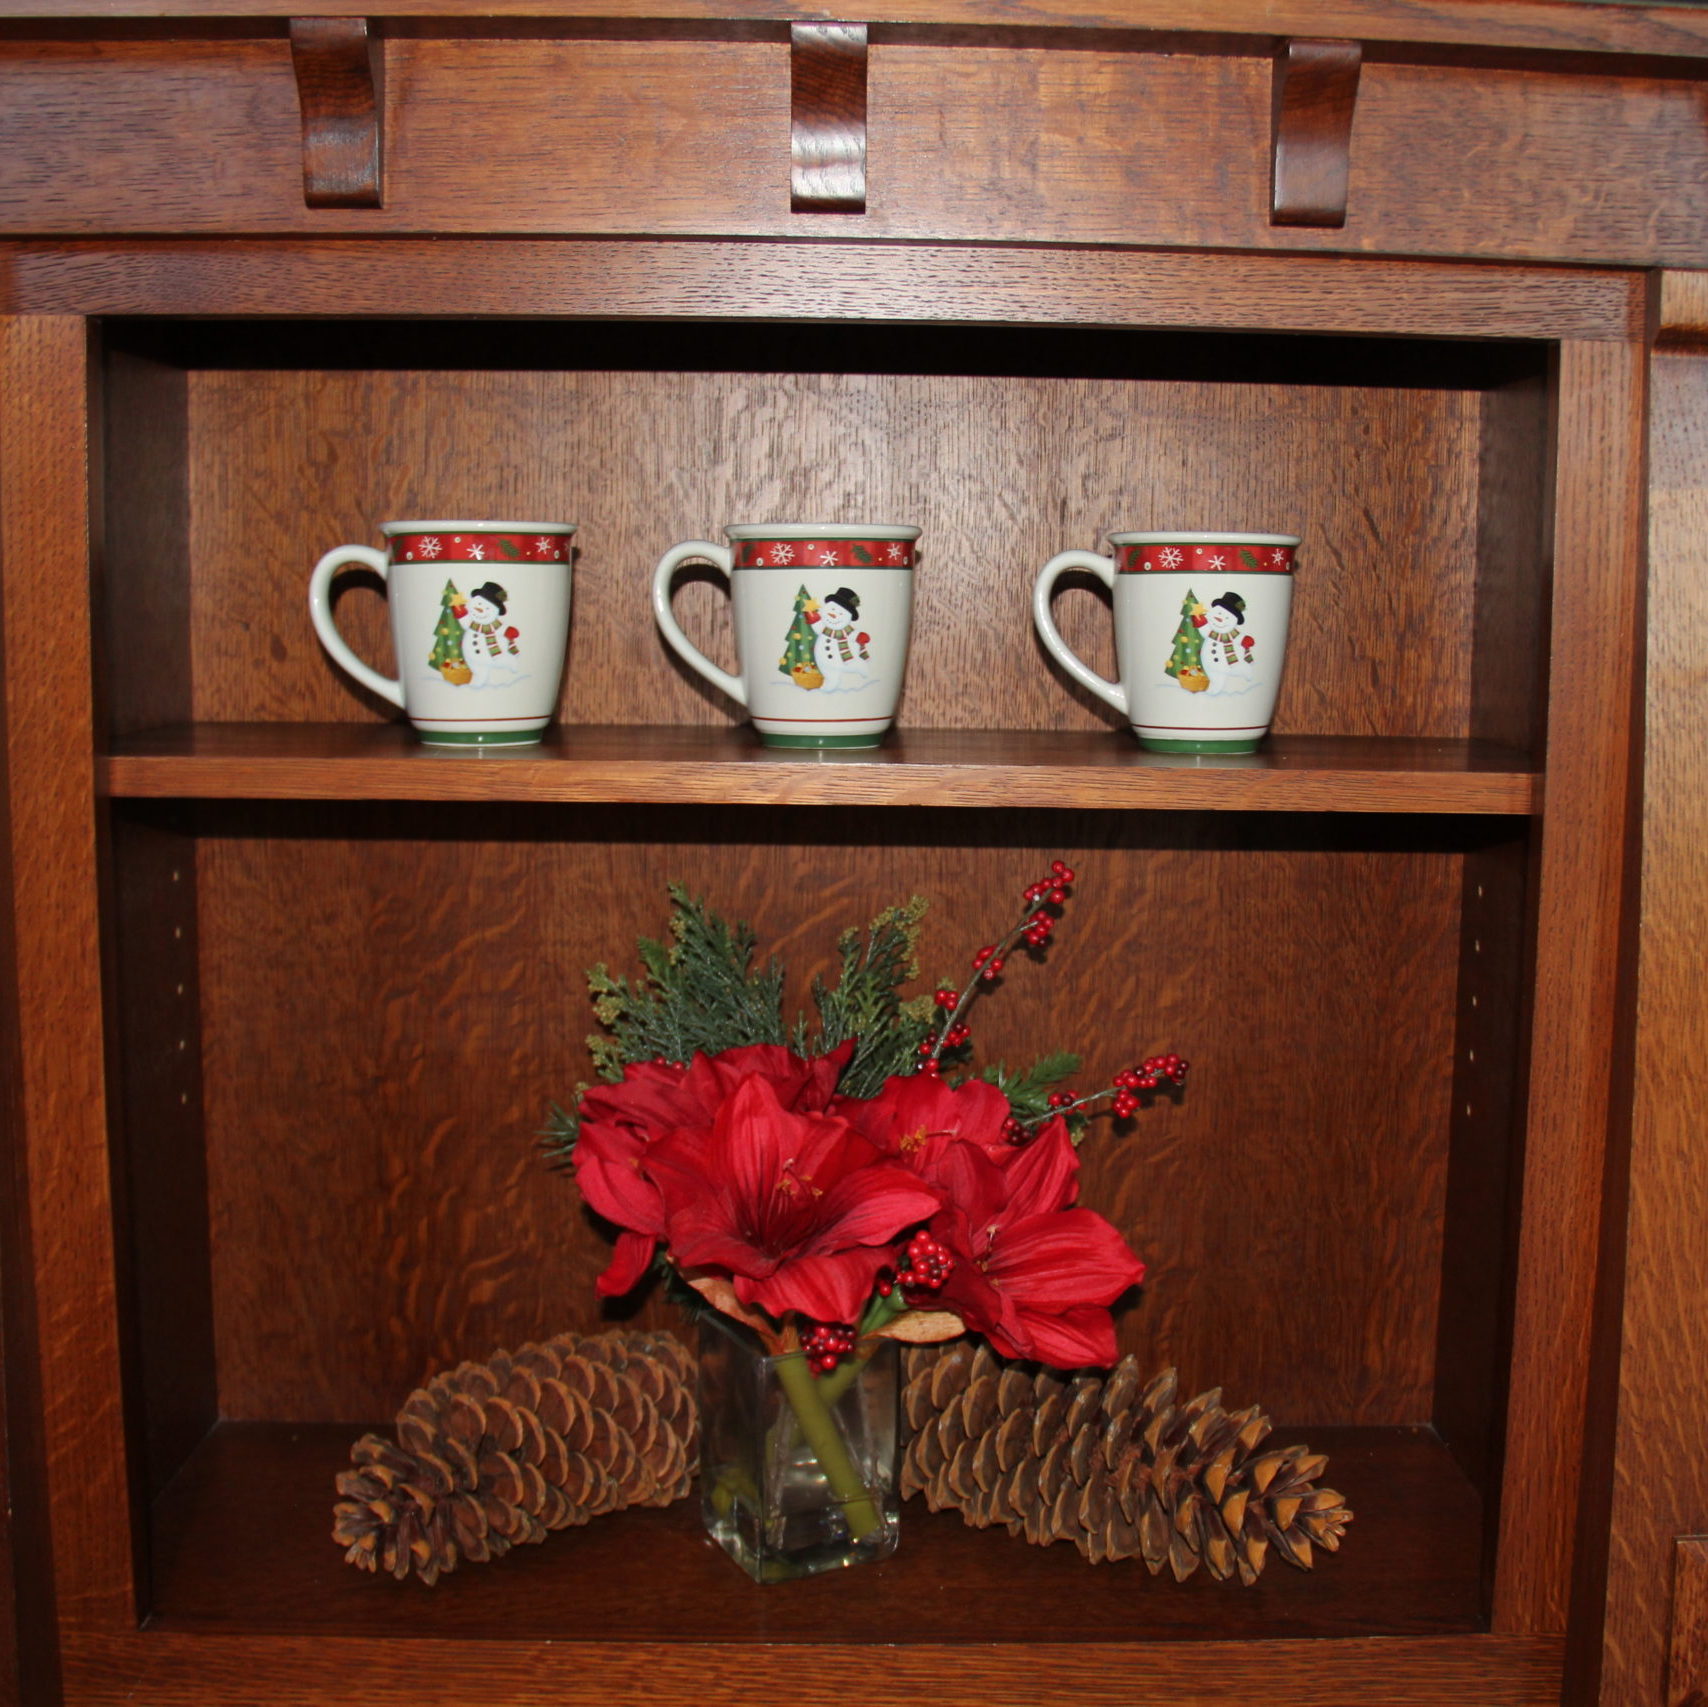 Longaberger Christmas pottery and a floral arrangement by Pottery Barn with giant pinecones to accent